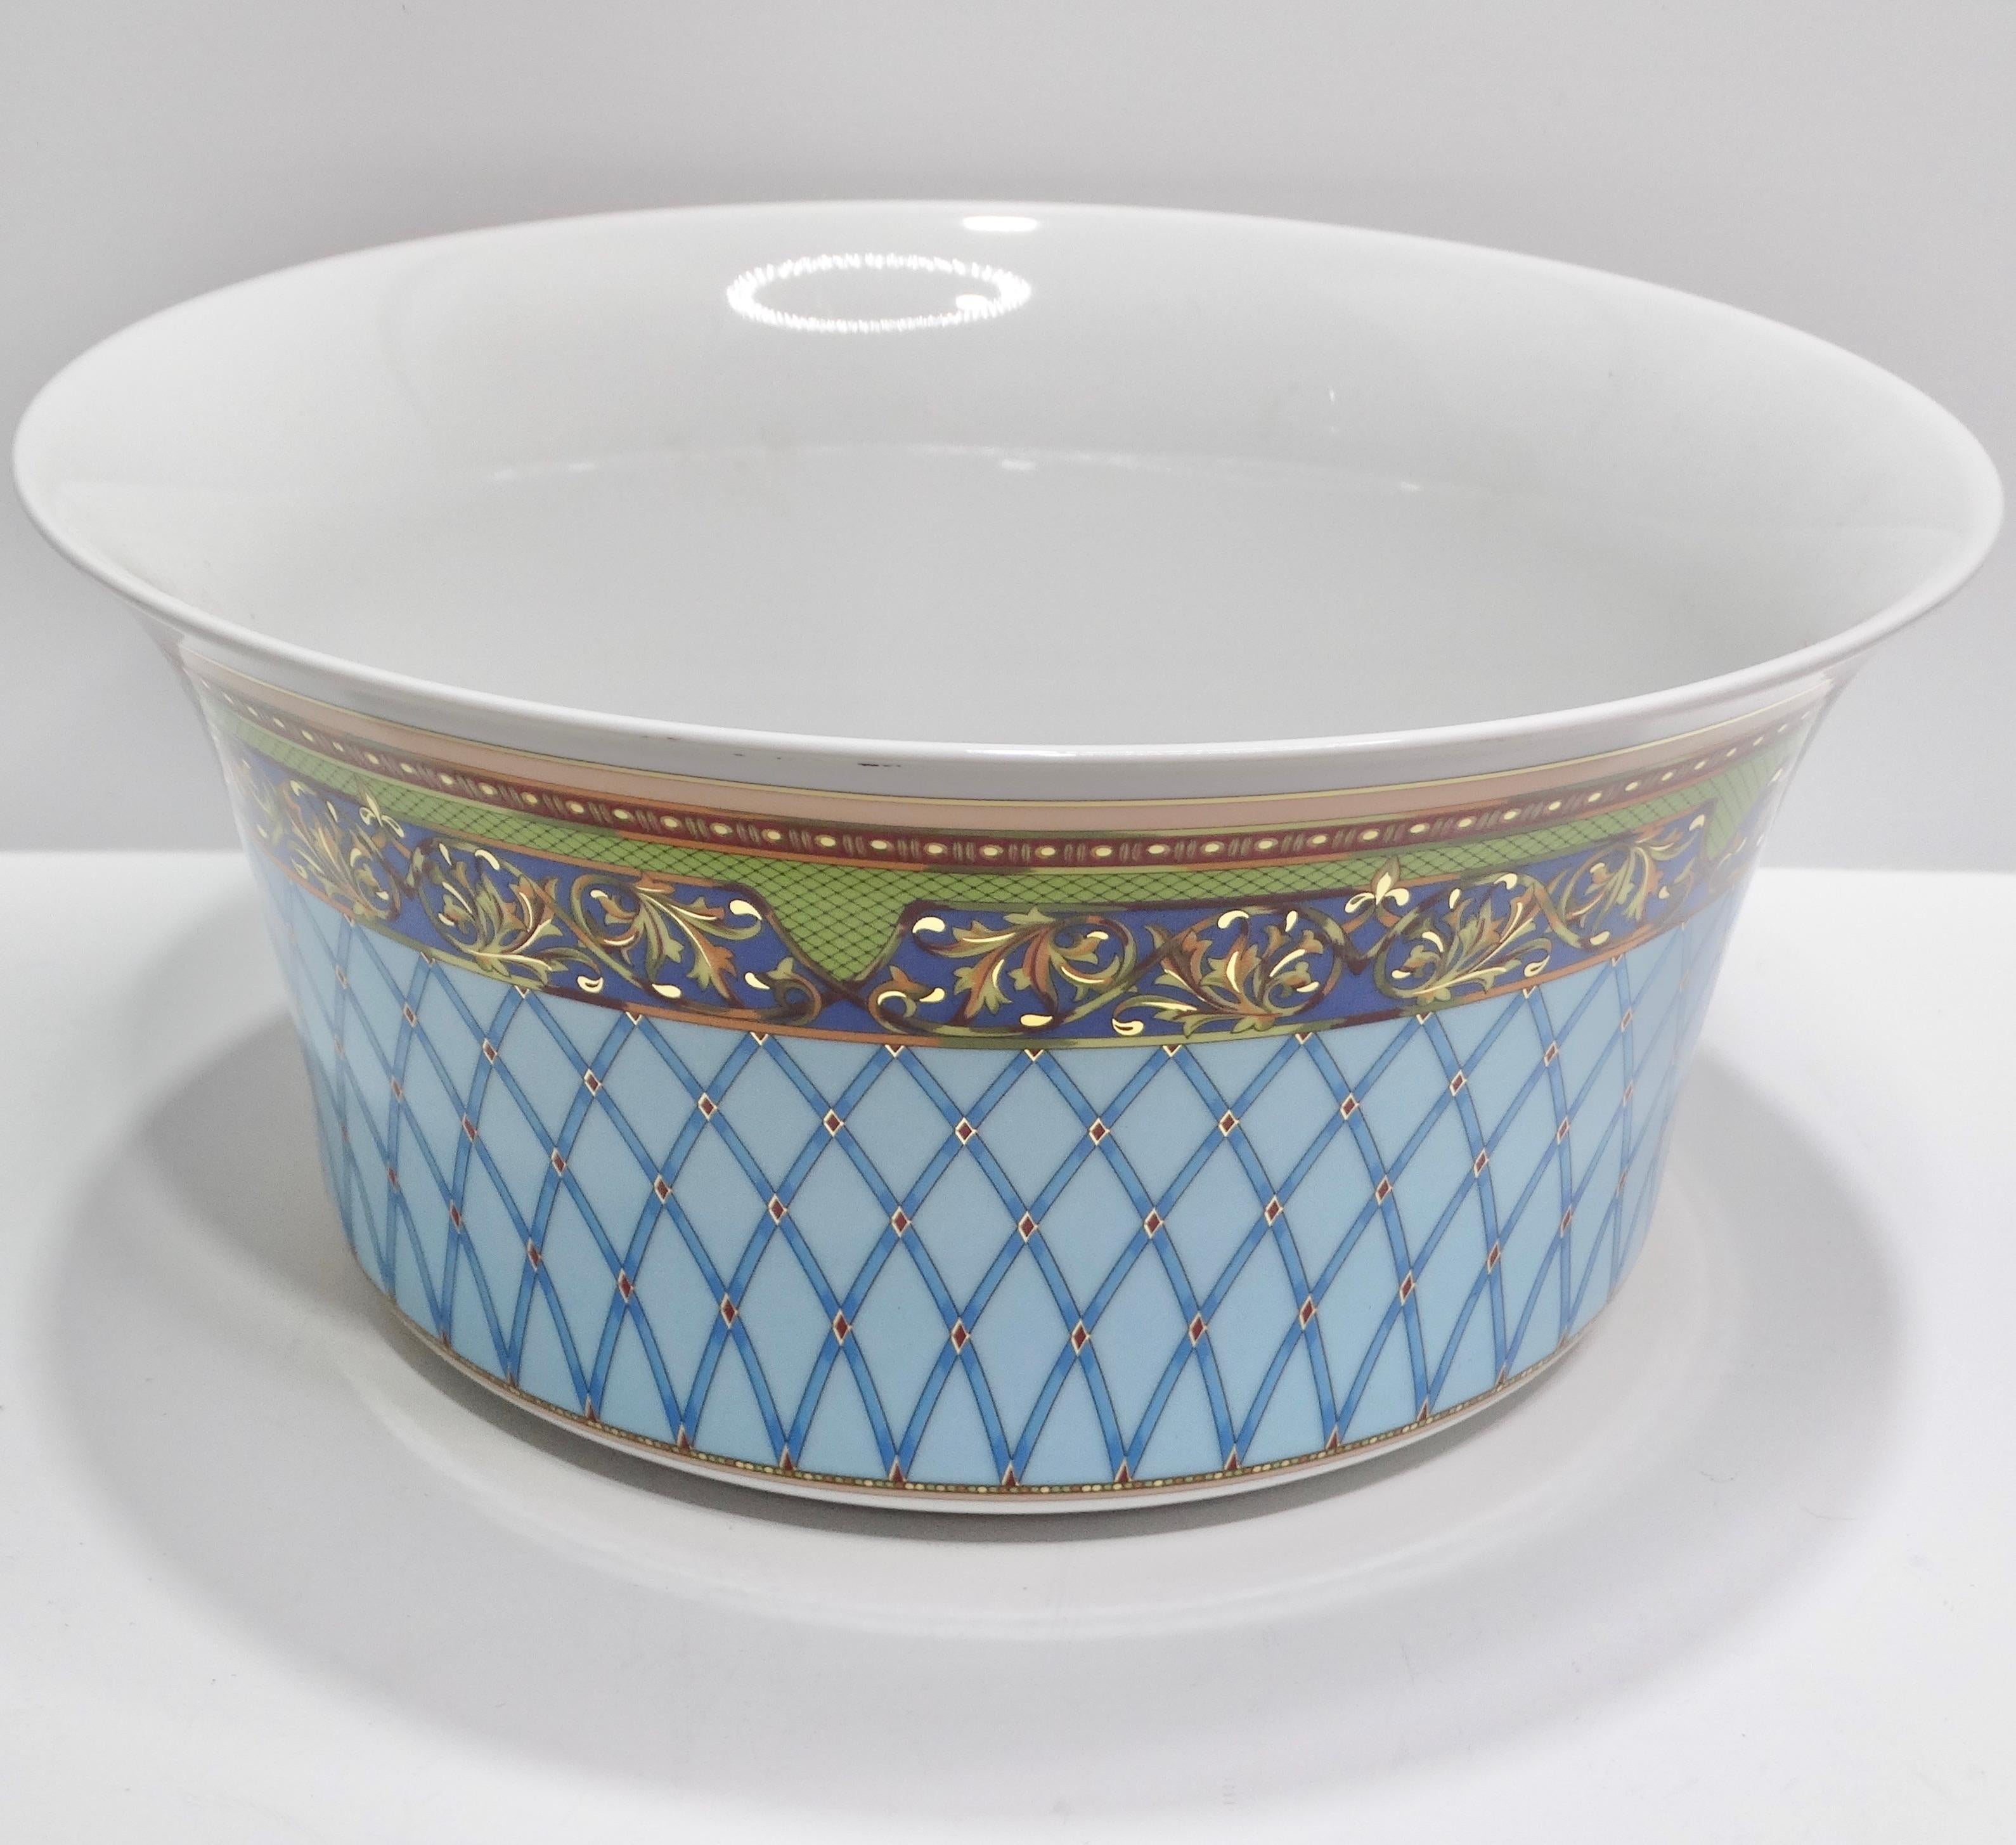 Do not miss out on the Versace Rosenthal 1990s Russian Dream Porcelain Bowl – a luxurious and artful addition that brings opulence to your dinner table or barware collection. Crafted from fine porcelain, this large bowl showcases an intricate